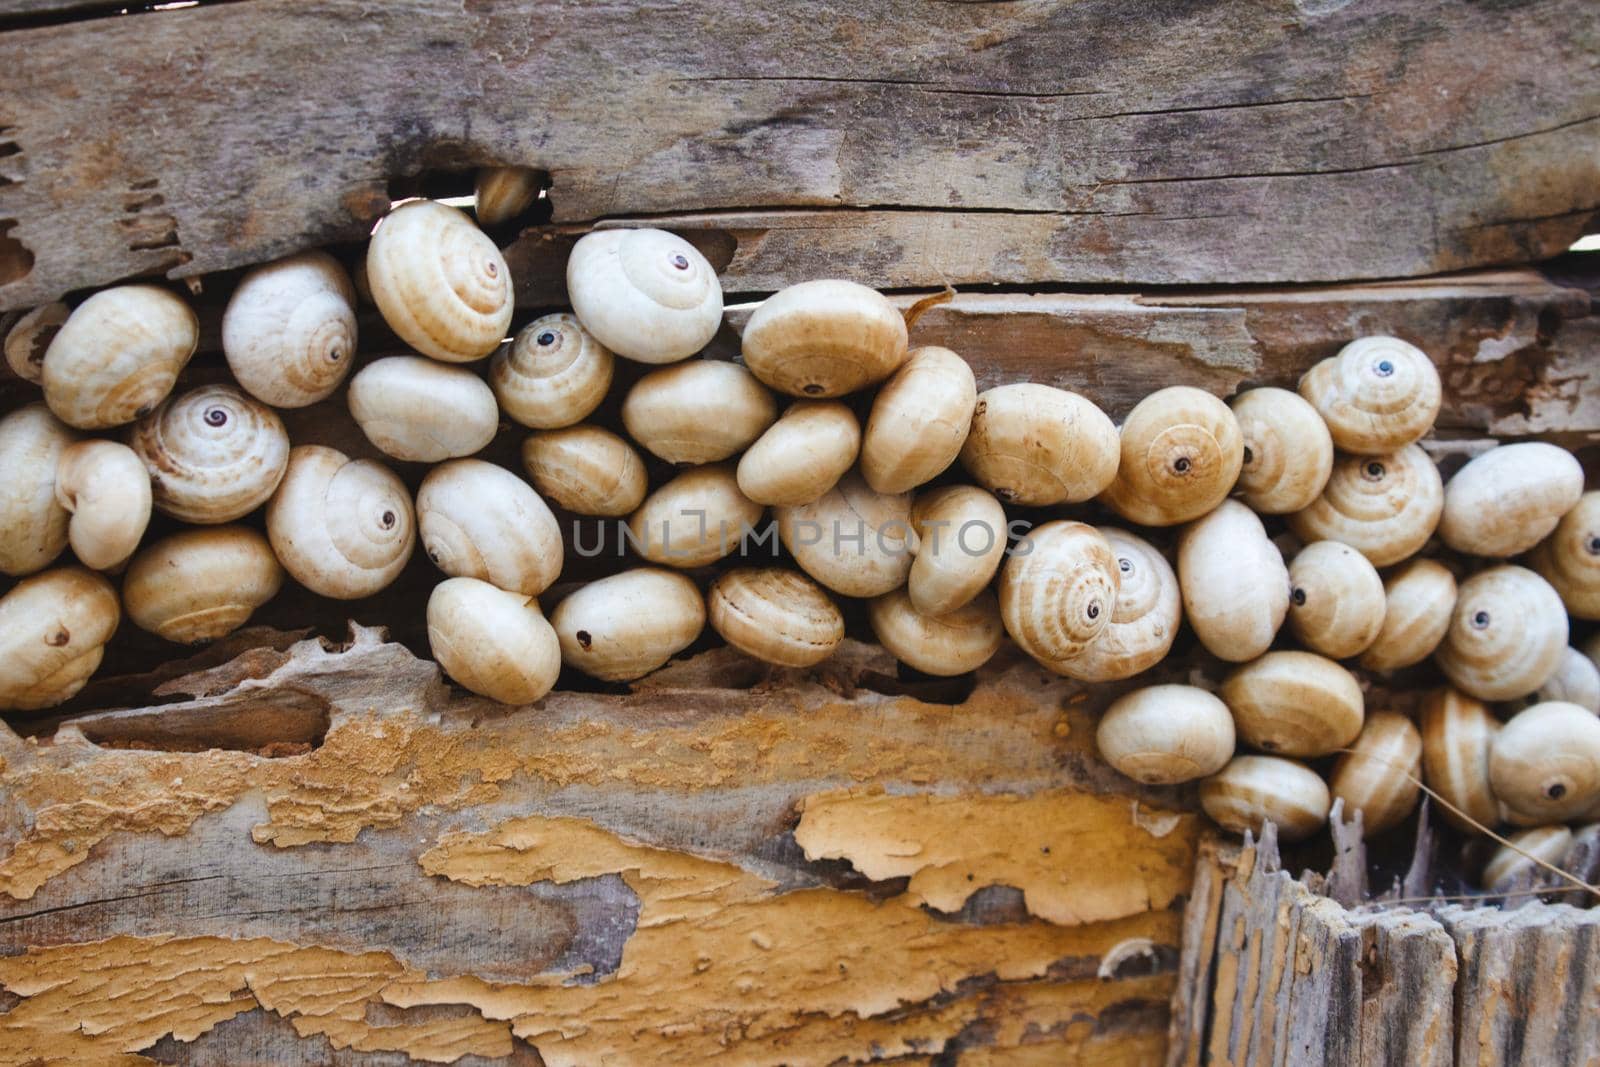 A group of many snails clustered together on a wooden plank fence